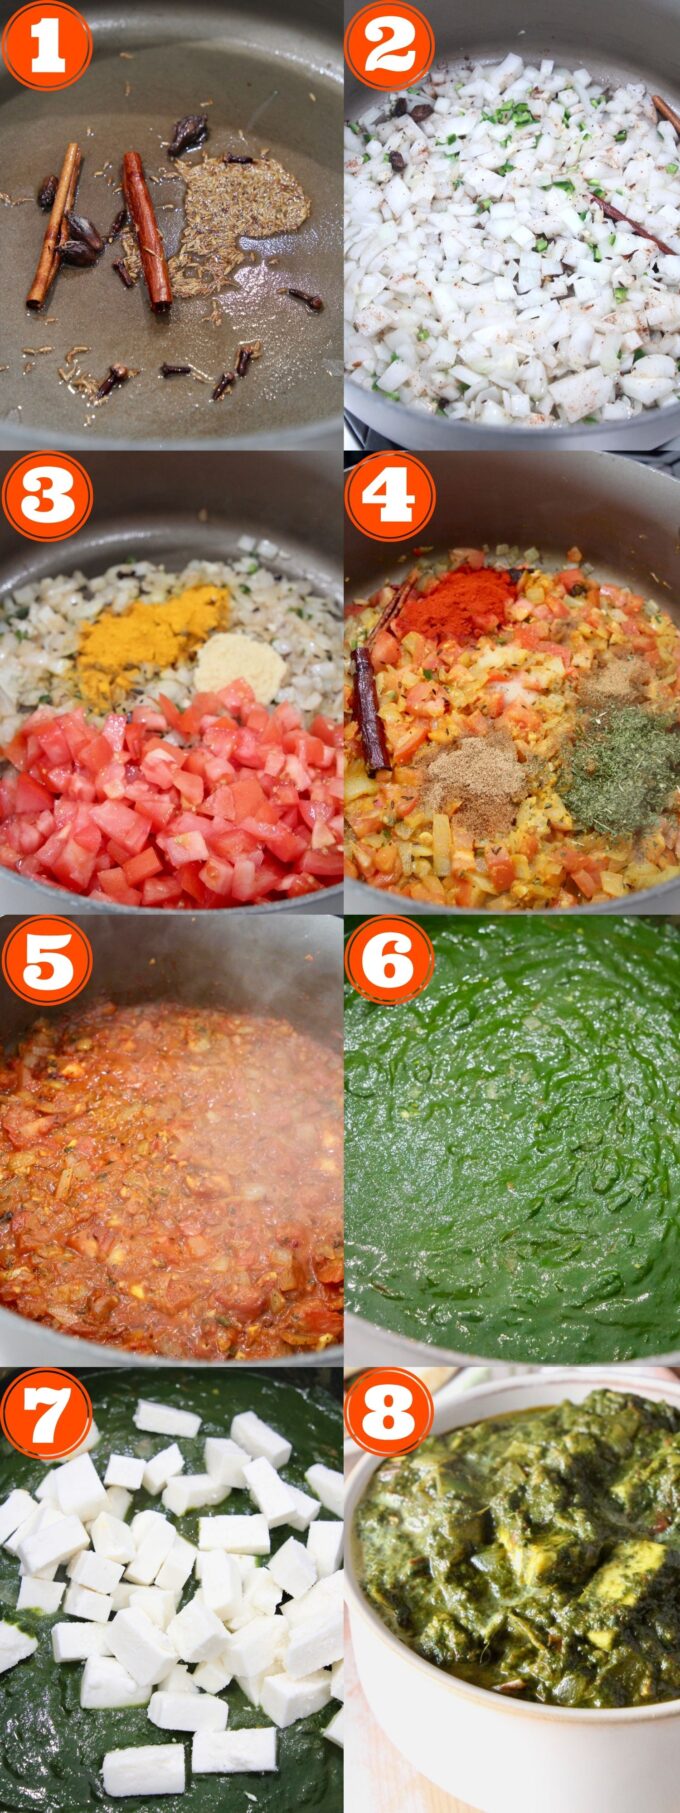 collage of images showing how to make palak paneer